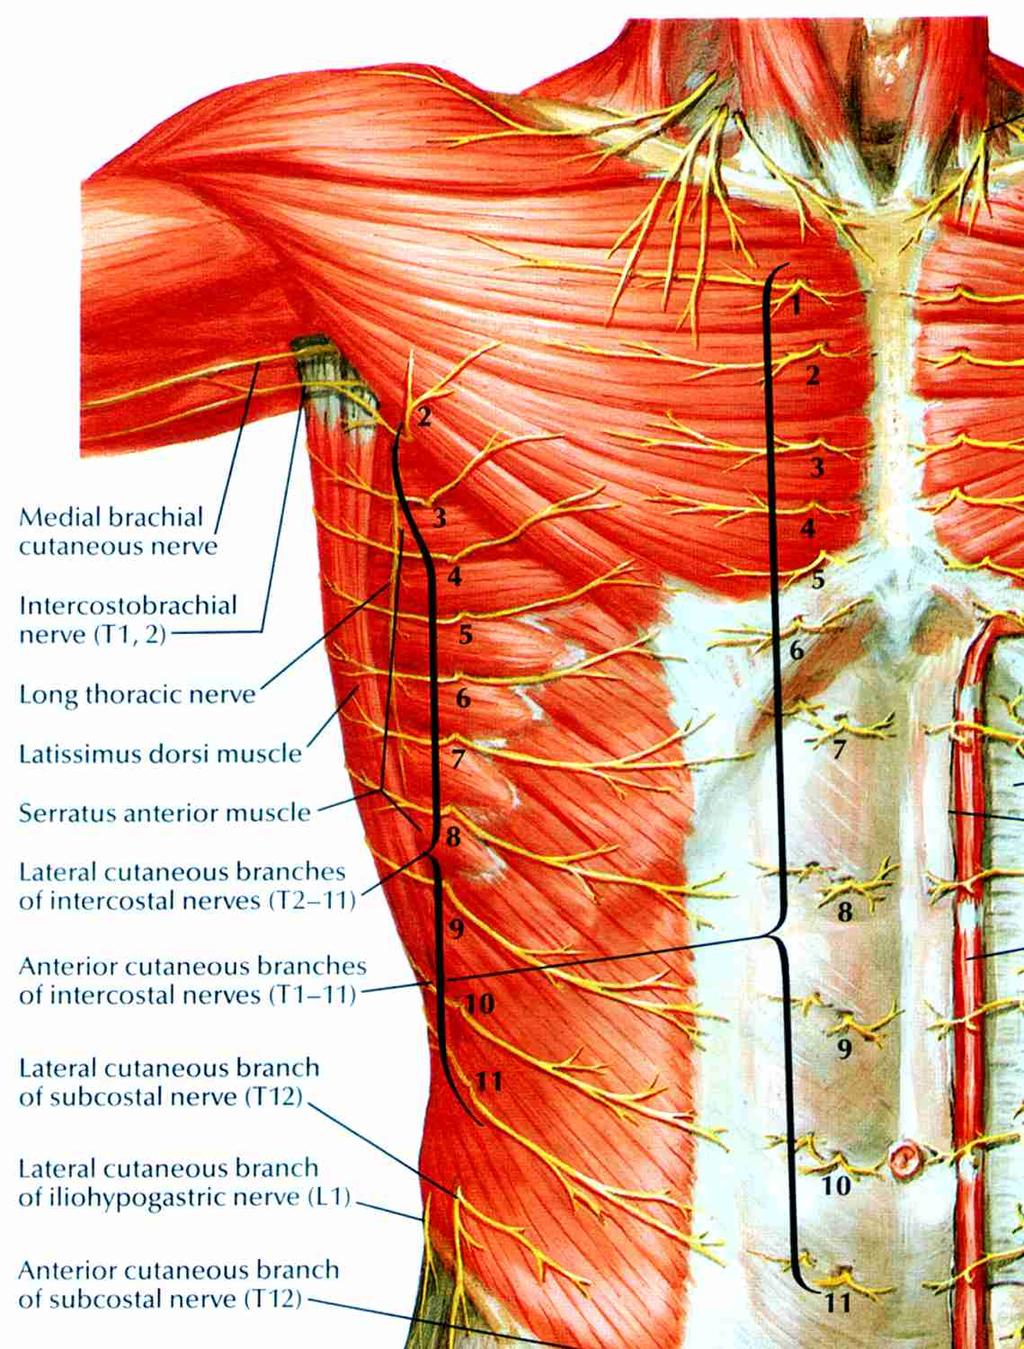 (Netter 2003) Muscular Rigidity Reflex contraction of abdominal muscles, particularly rectus abdominis Afferent limb of reflex